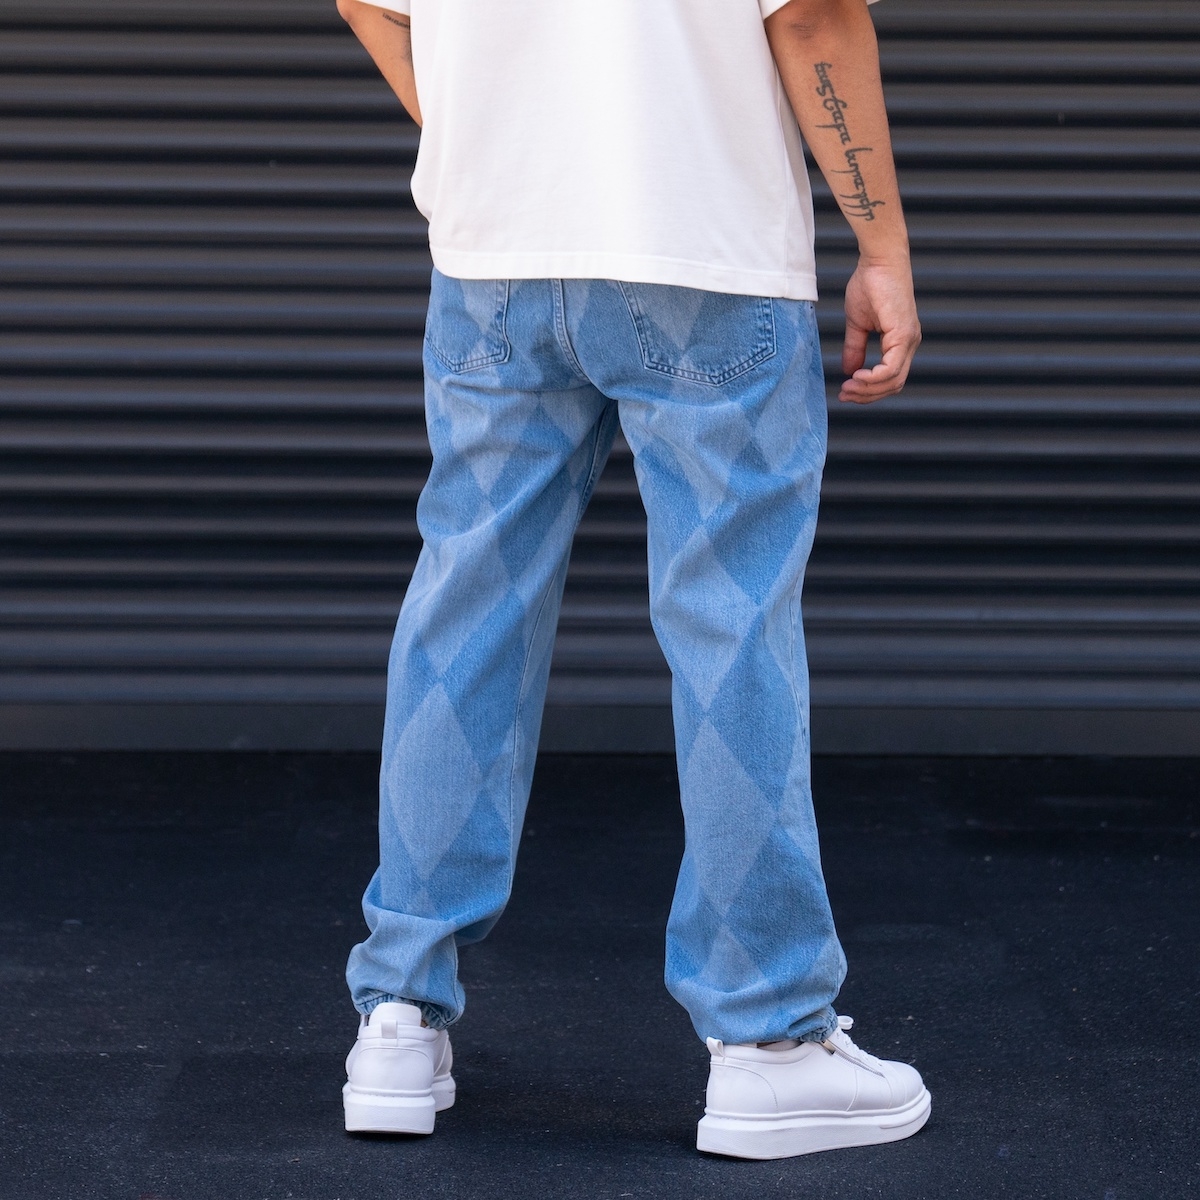 Coherente hombro evidencia Men's Oversized Baggy Jeans Trousers Ice Blue